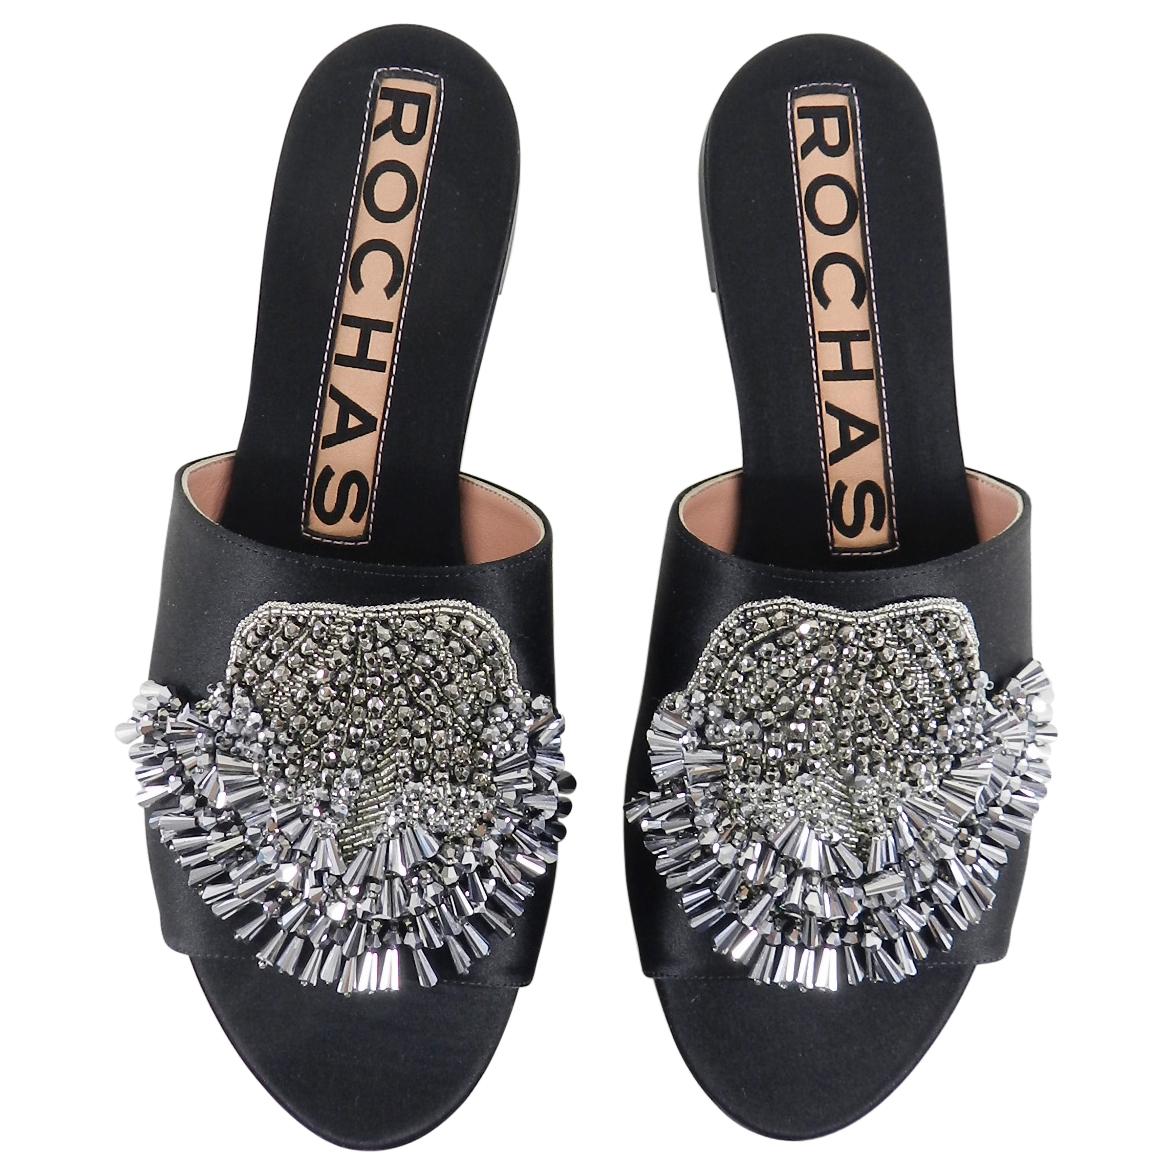 Rochas Black Satin Flat Slide Sandals.  Black satin body decorated with Silver Bead fringe. Large logo instep with contrasting pink.  Marked size 38 but fits much smaller as a 37 (usa 6.5) and will be too small for 38. Excellent pre-owned.  Please